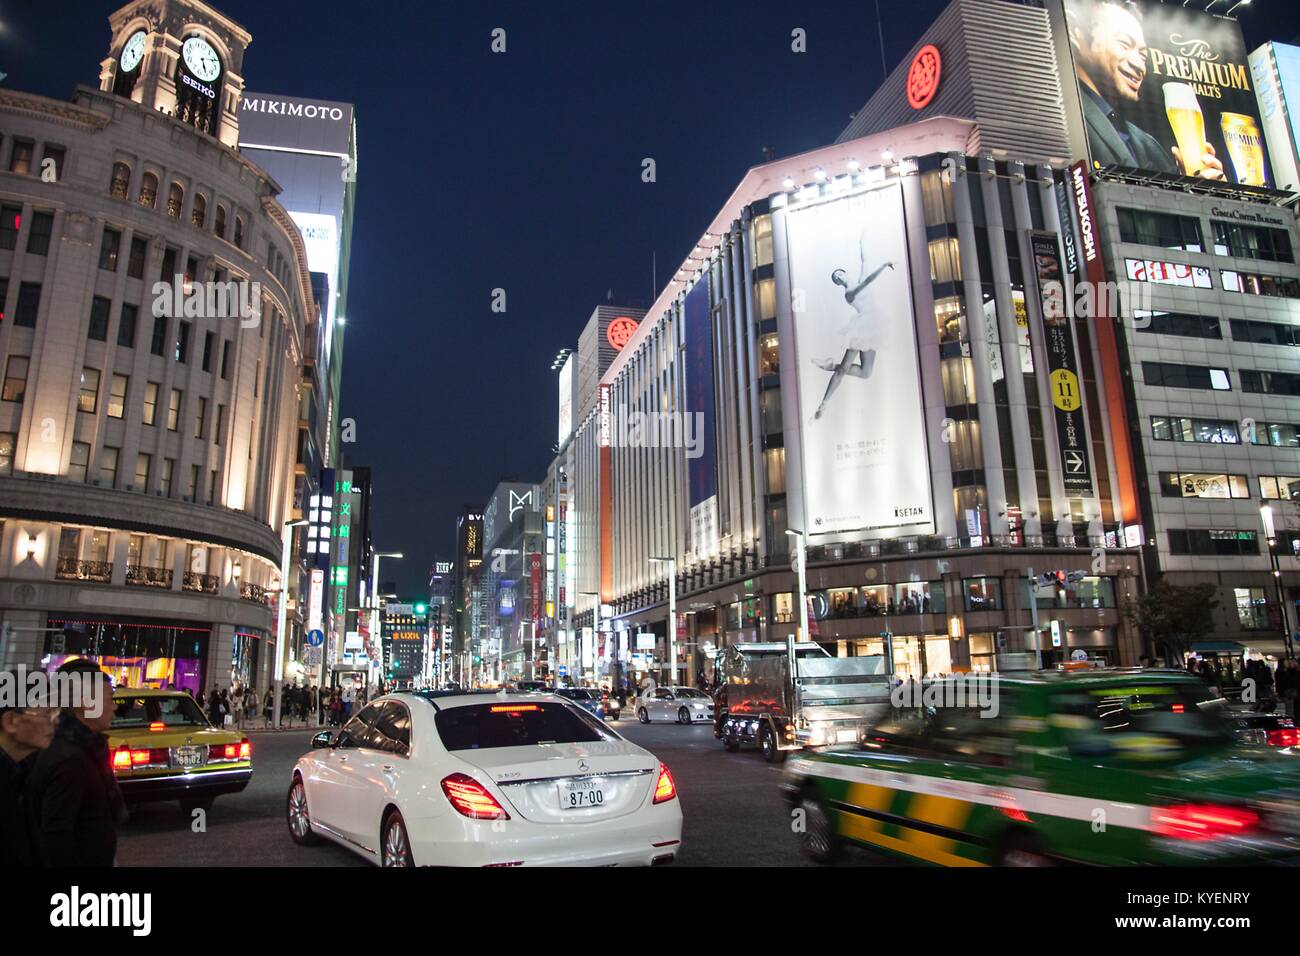 Cars pass through a busy intersection as pedestrians prepare to cross, with brightly lit shops and billboards visible, at night in the Yurakucho Ginza district, known for its older restaurants and bars, in the Chiyoda Ward of Tokyo, Japan, November, 2017. () Stock Photo